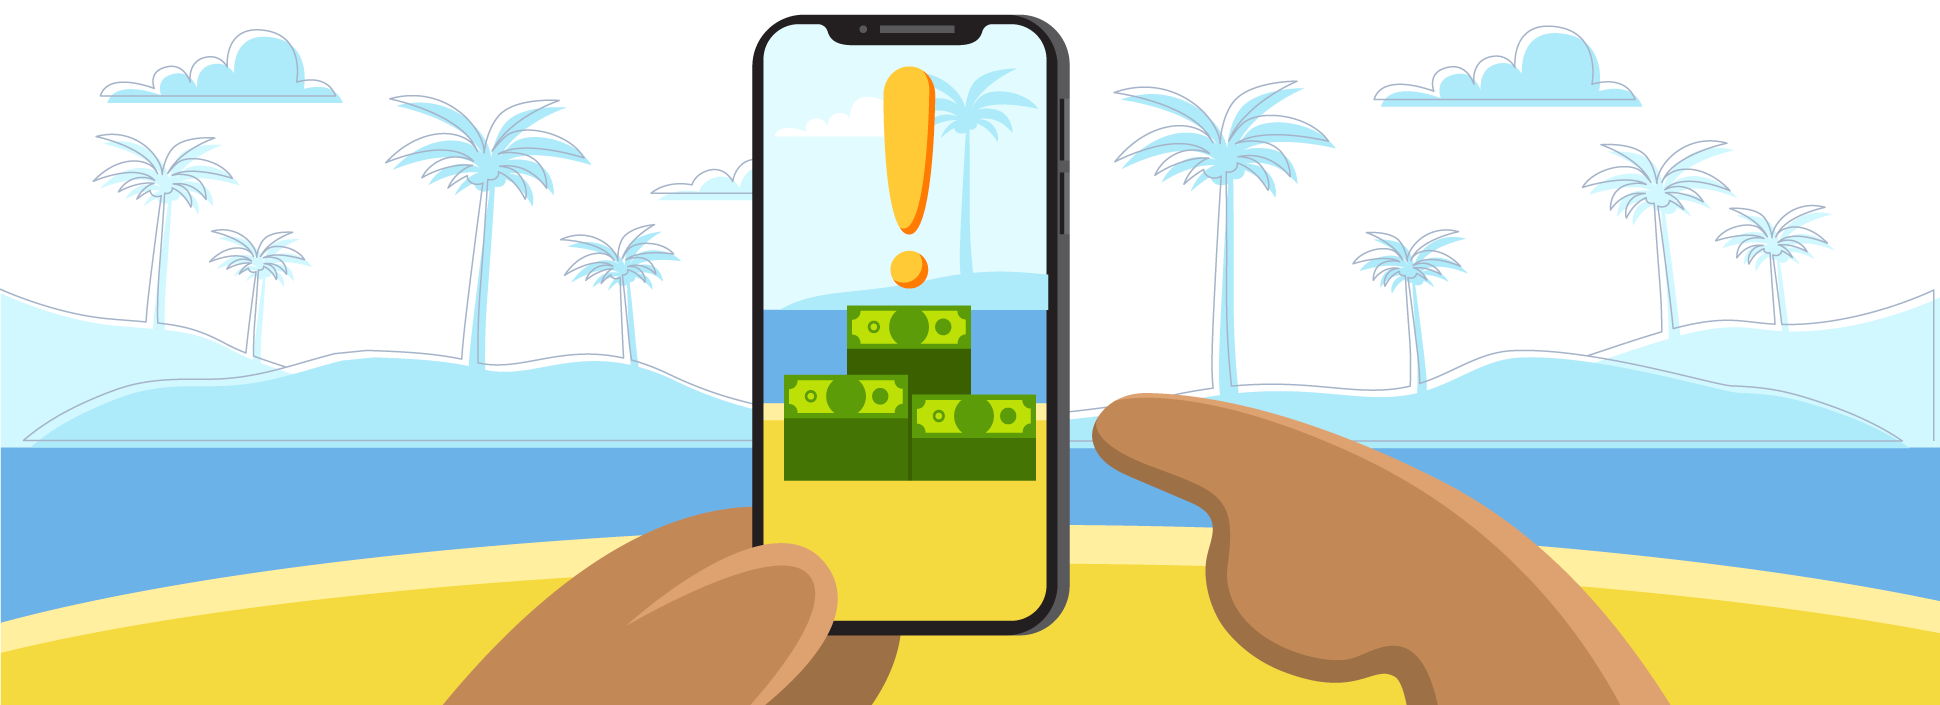 5 Legit Ways To Play Games To Earn Money (Best Game Apps That Pay!) 